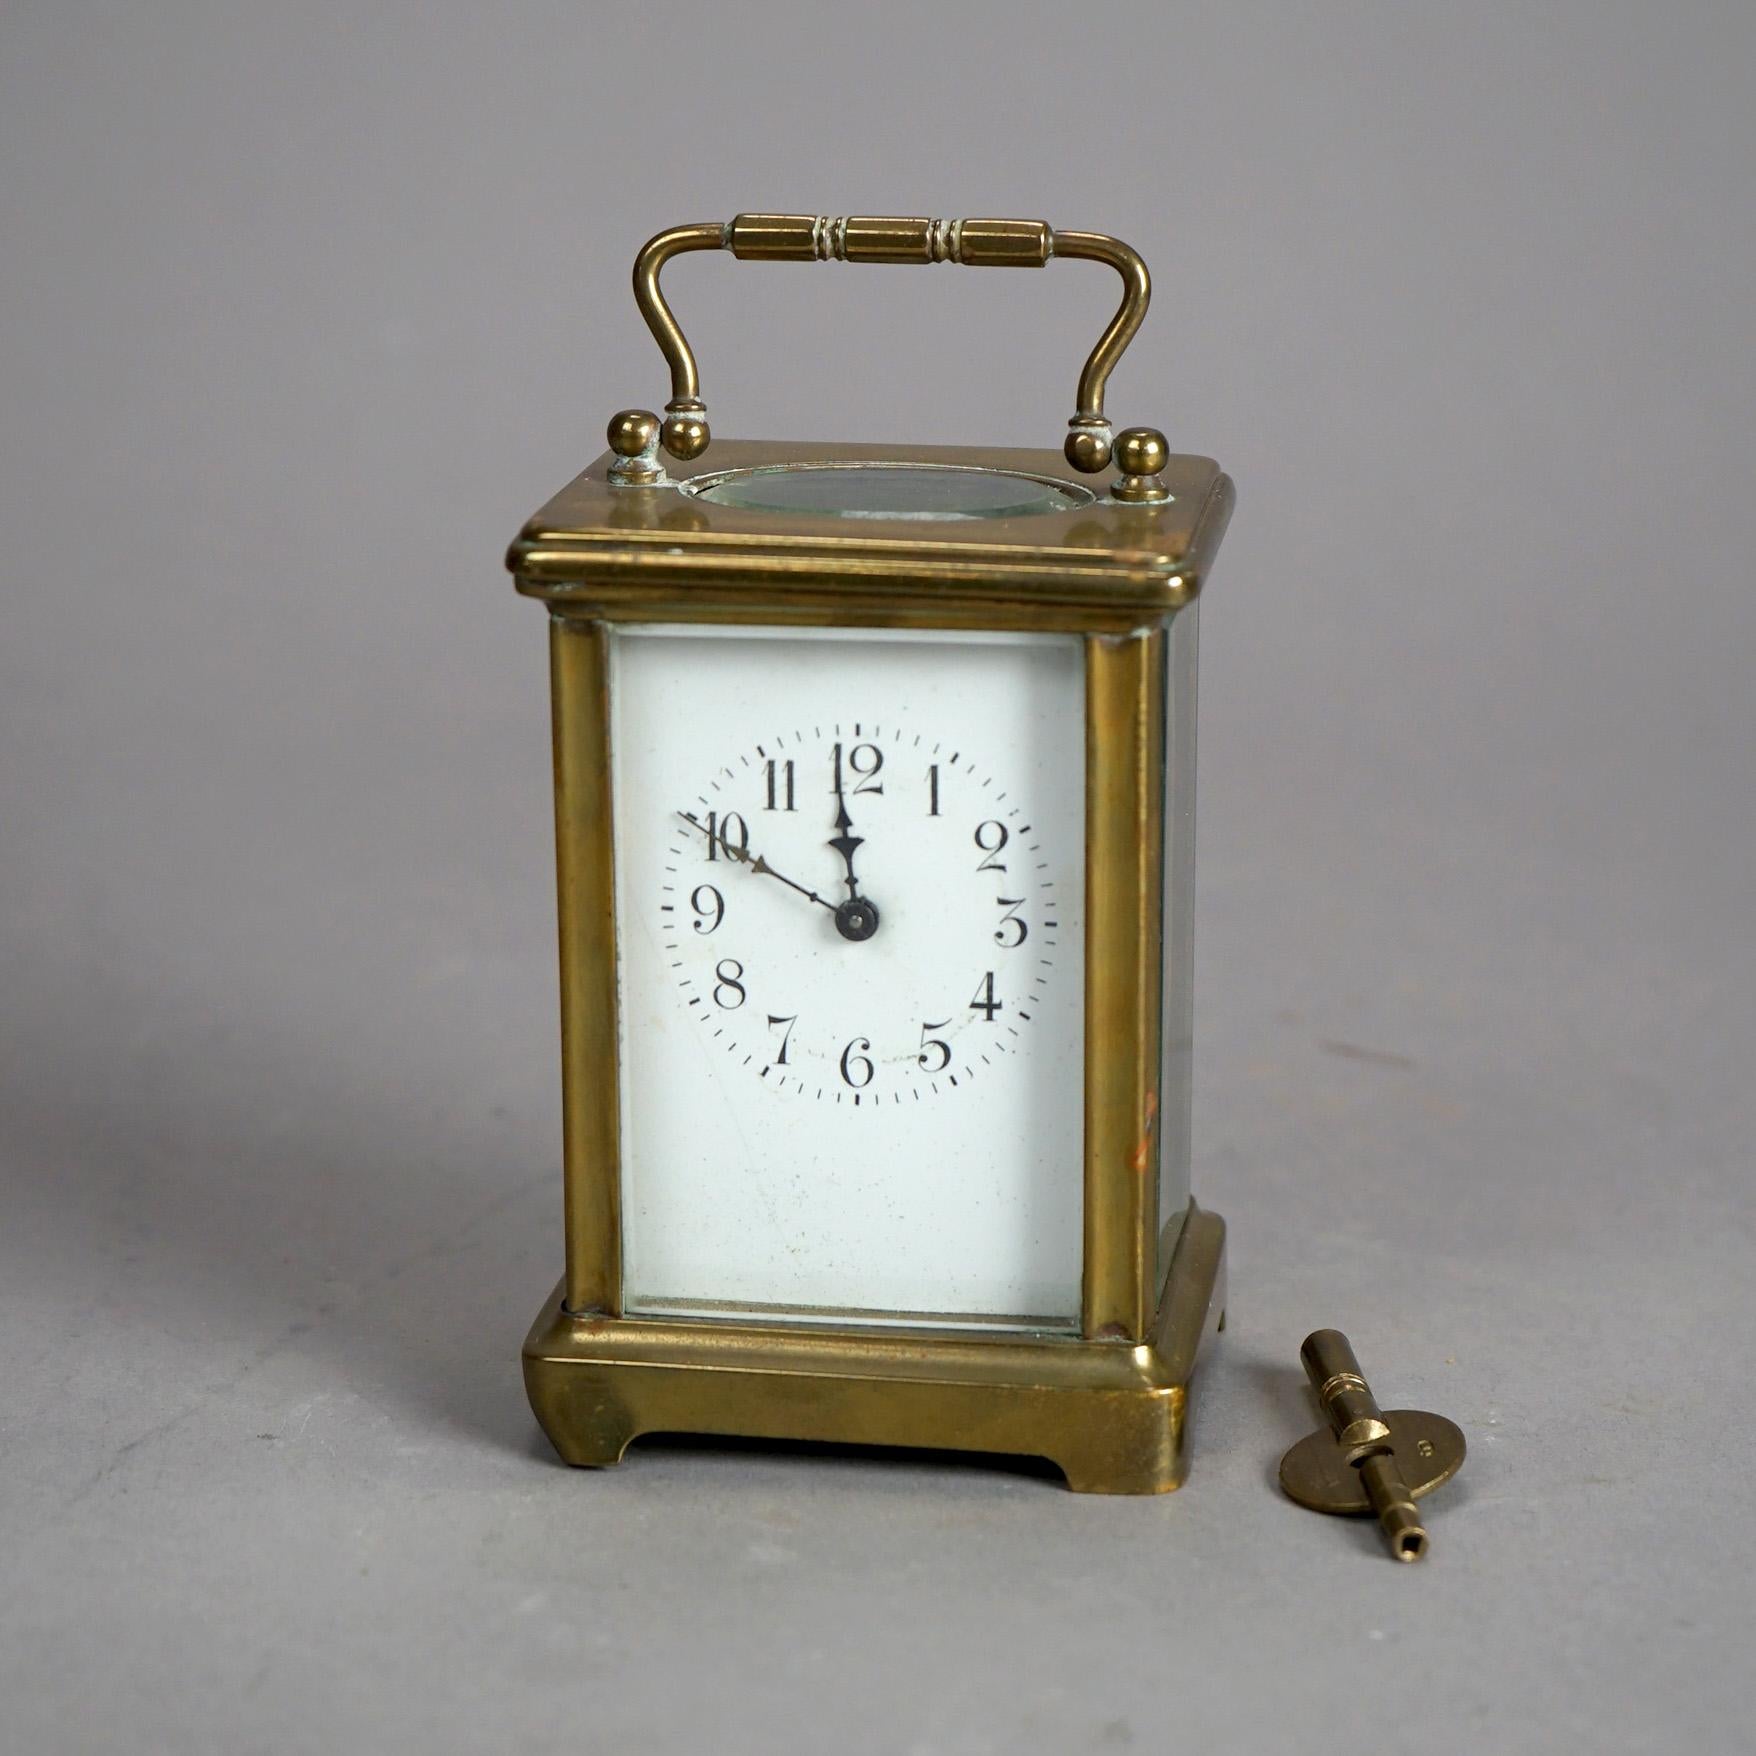 Antique French Victorian Brass & Crystal Carriage Clock with Key, embossed MADE IN FRANCE, Circa 1890

Measures- 6''H x 3''W x 2.5''D